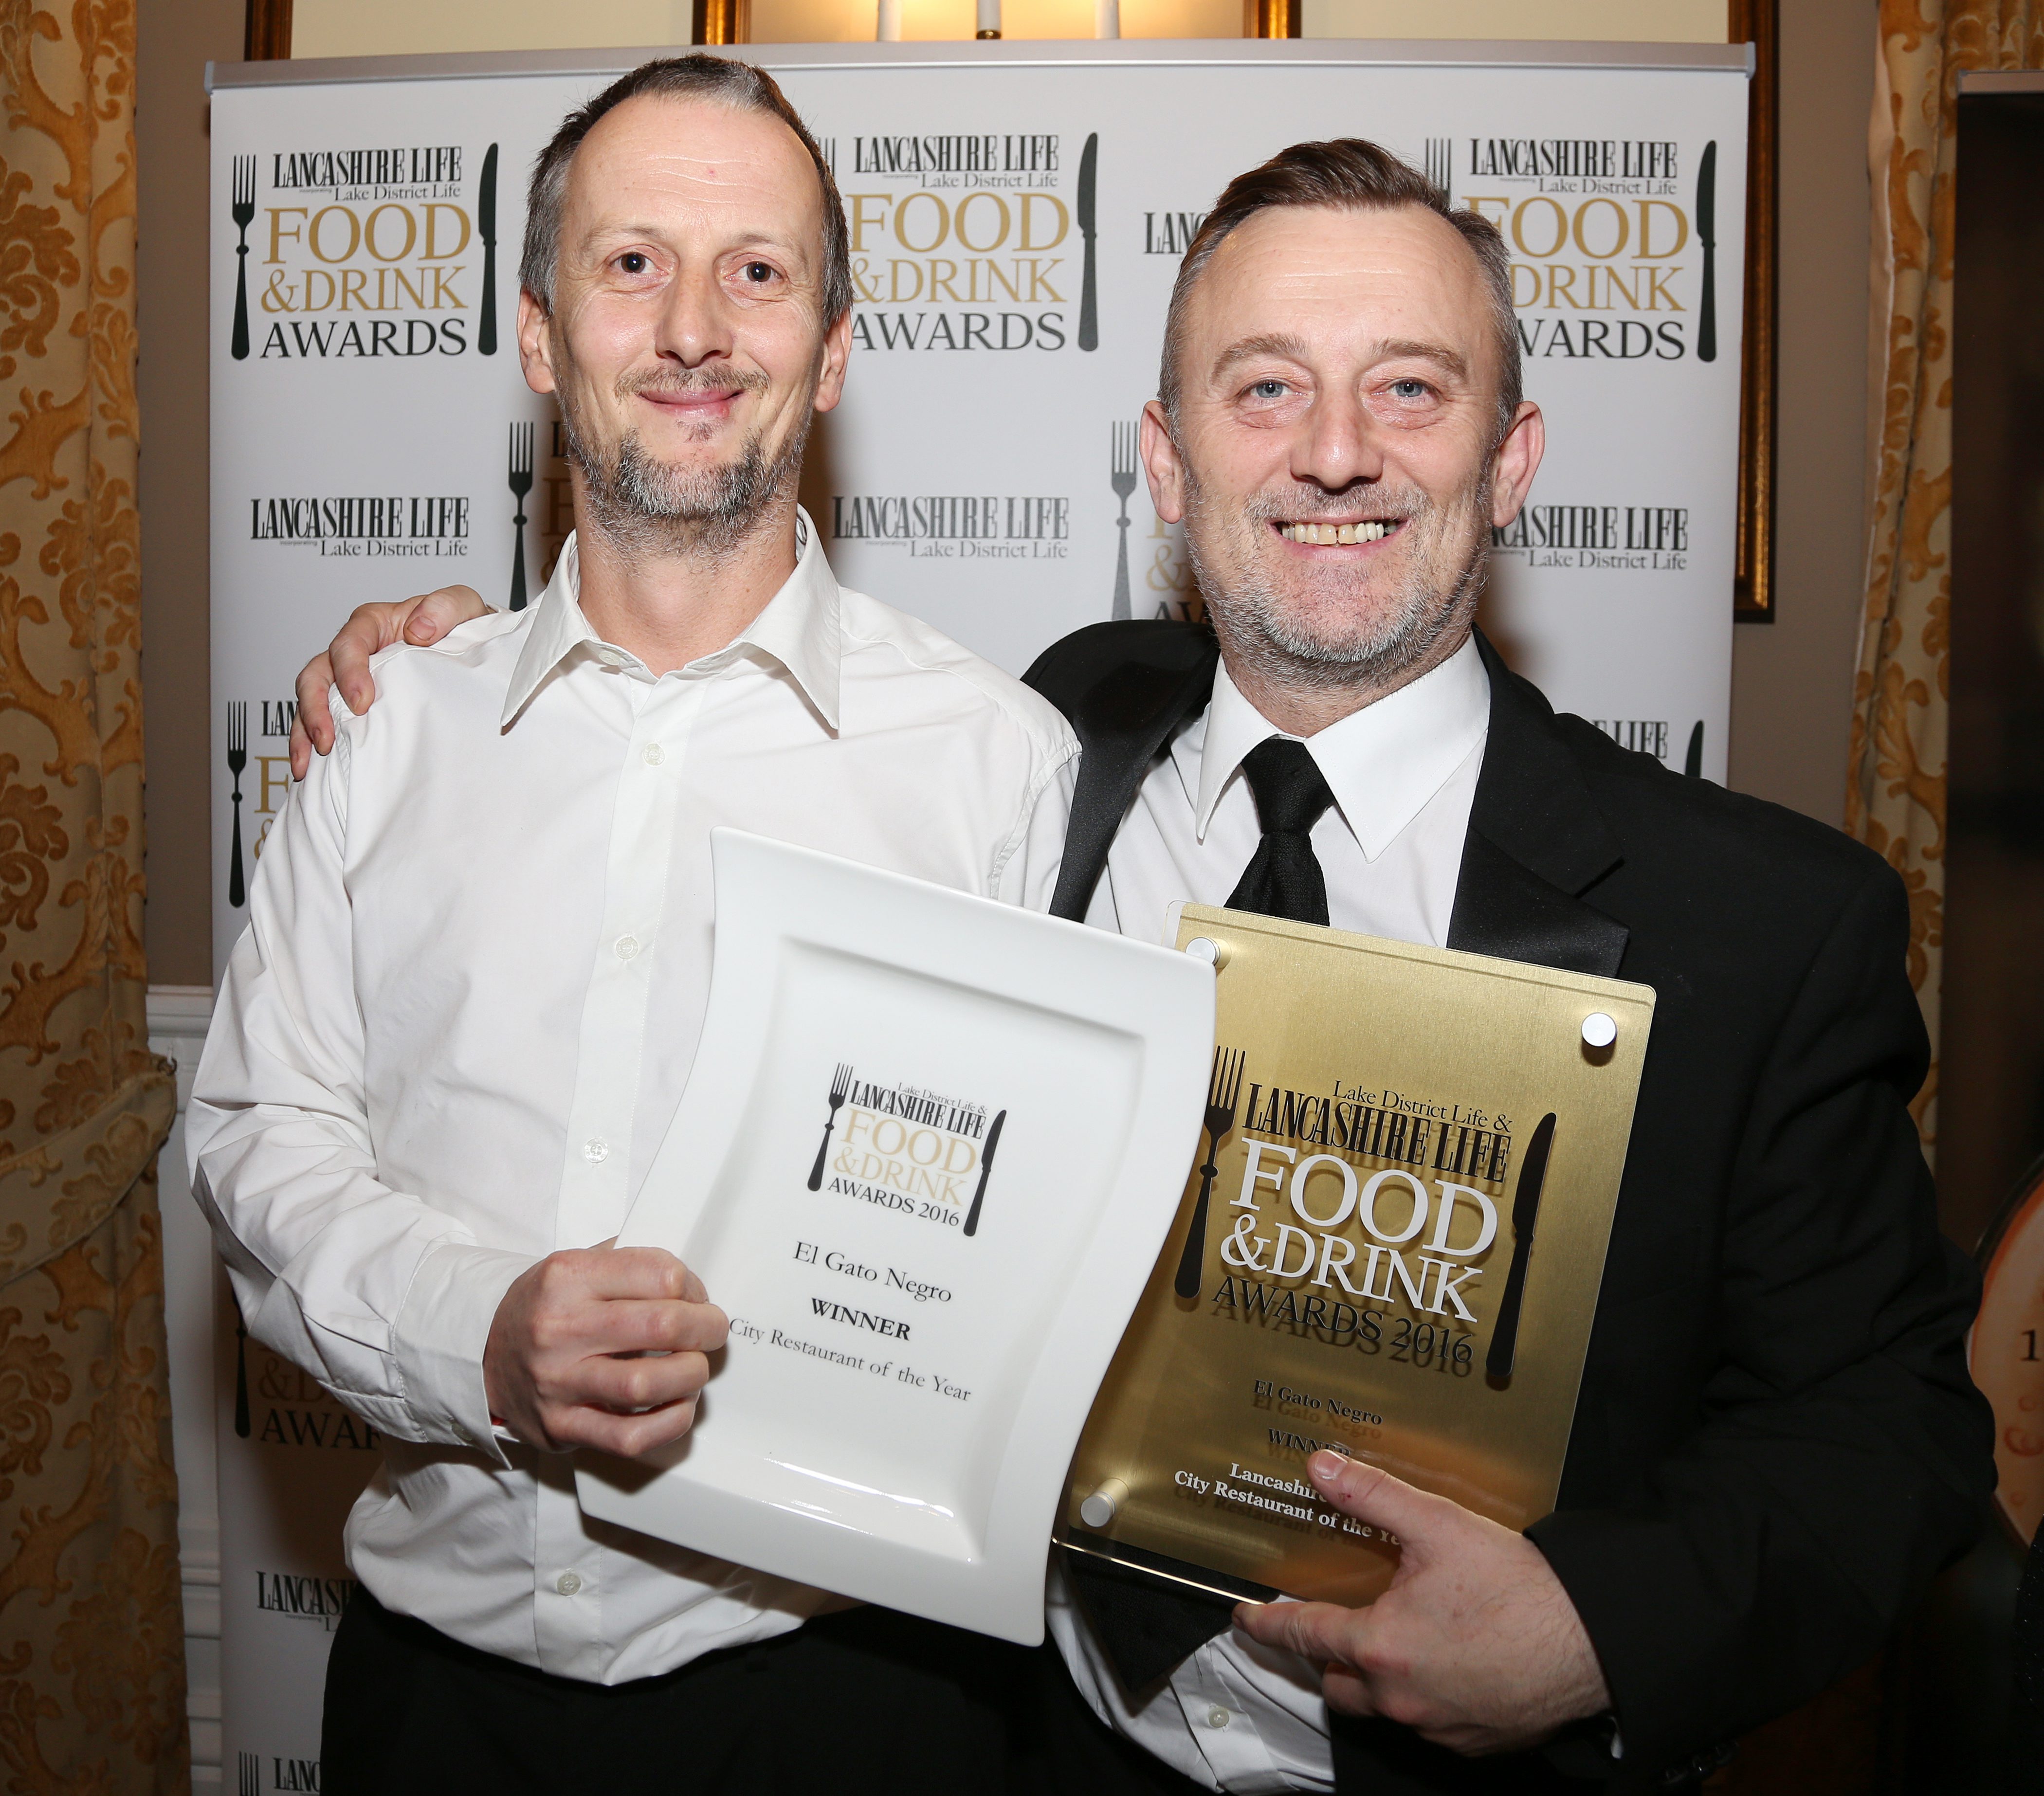 City Restaurant of the Year winner was El Gato Negro, Manchester. Photographed here are Richard Jones and Simon Shaw